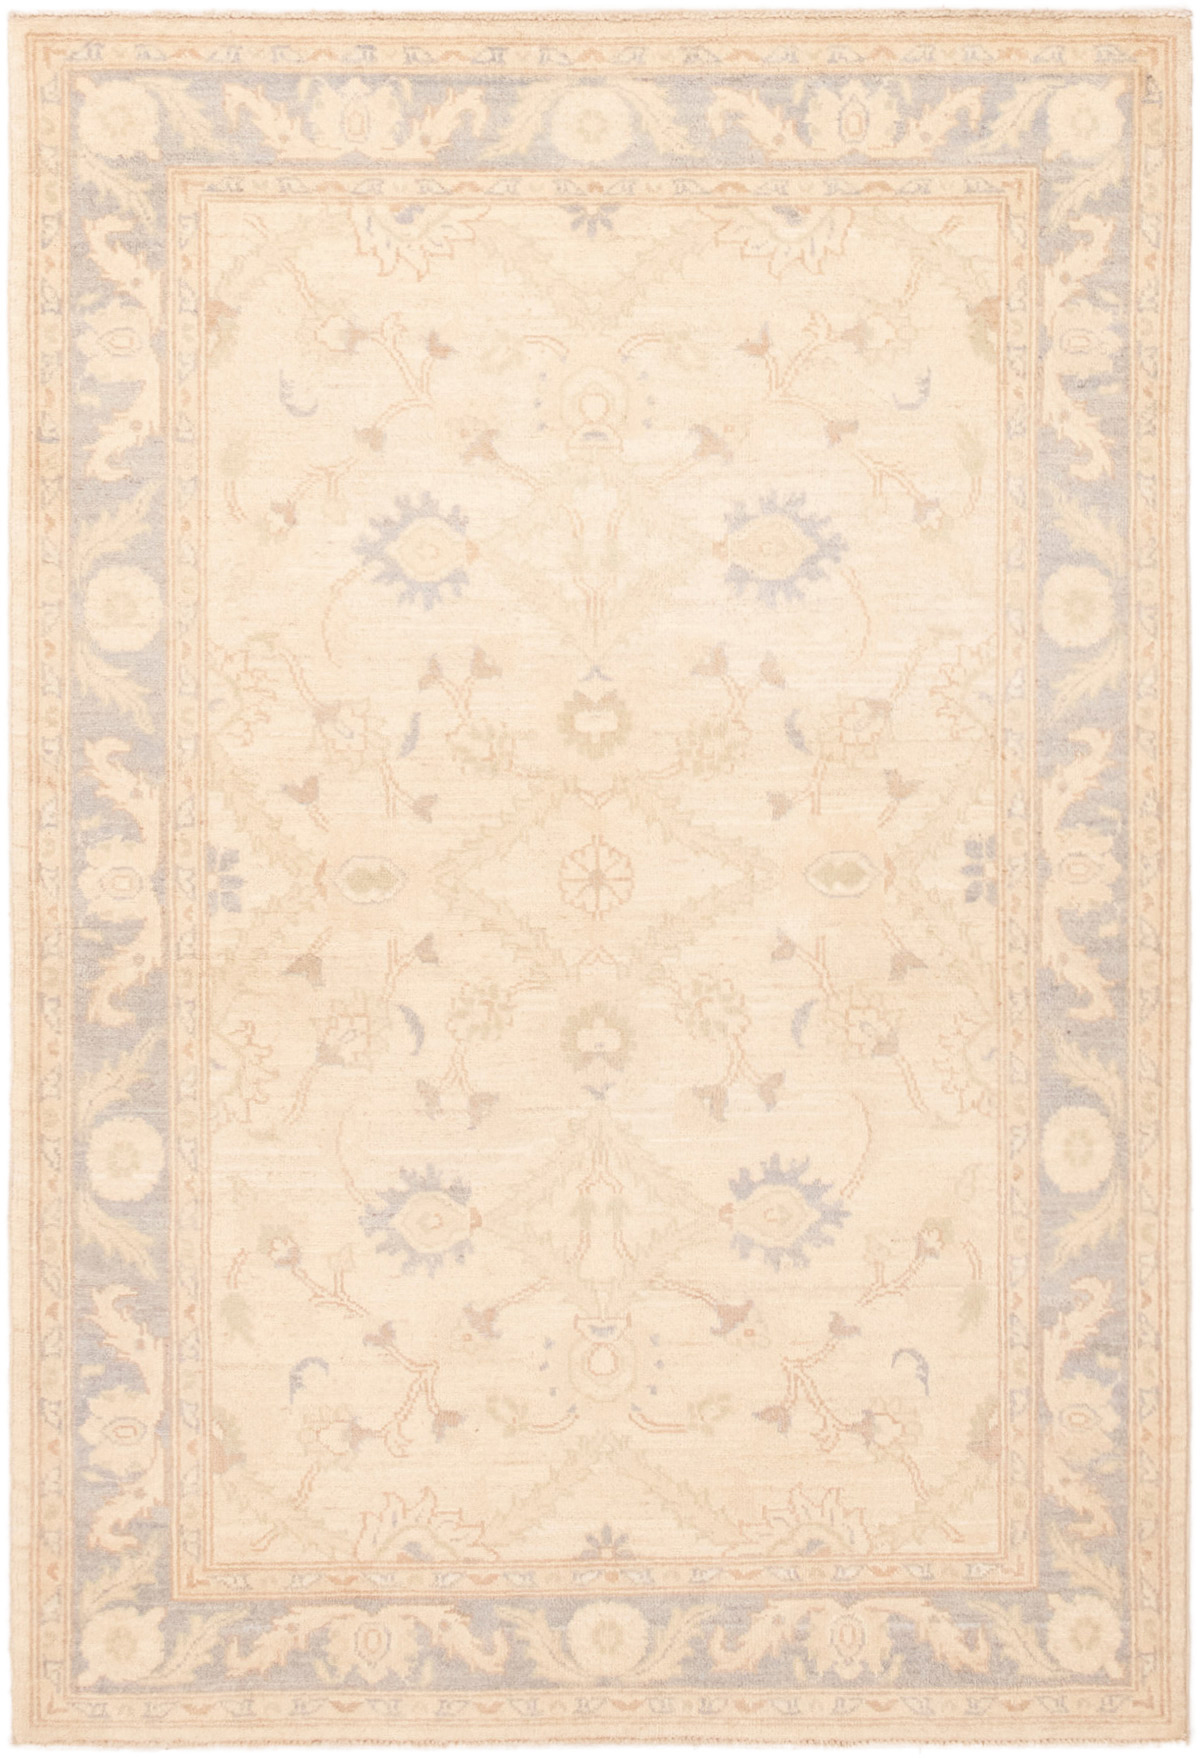 Hand-knotted Peshawar Finest Cream Wool Rug 3'10" x 5'10"  Size: 3'10" x 5'10"  